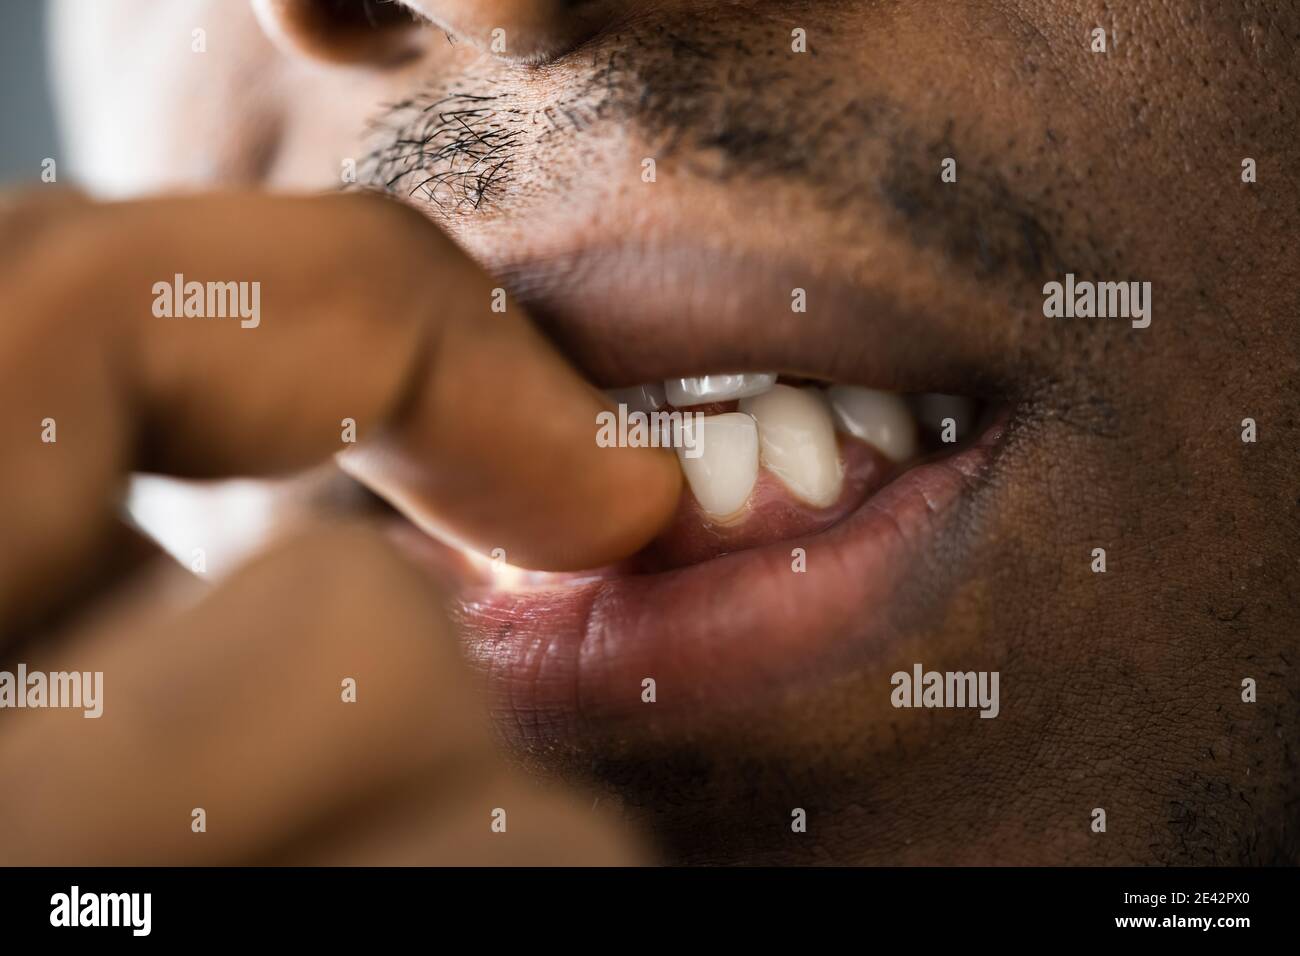 Neurotic Fingernail Biting Hands And Mouth Close Up Stock Photo